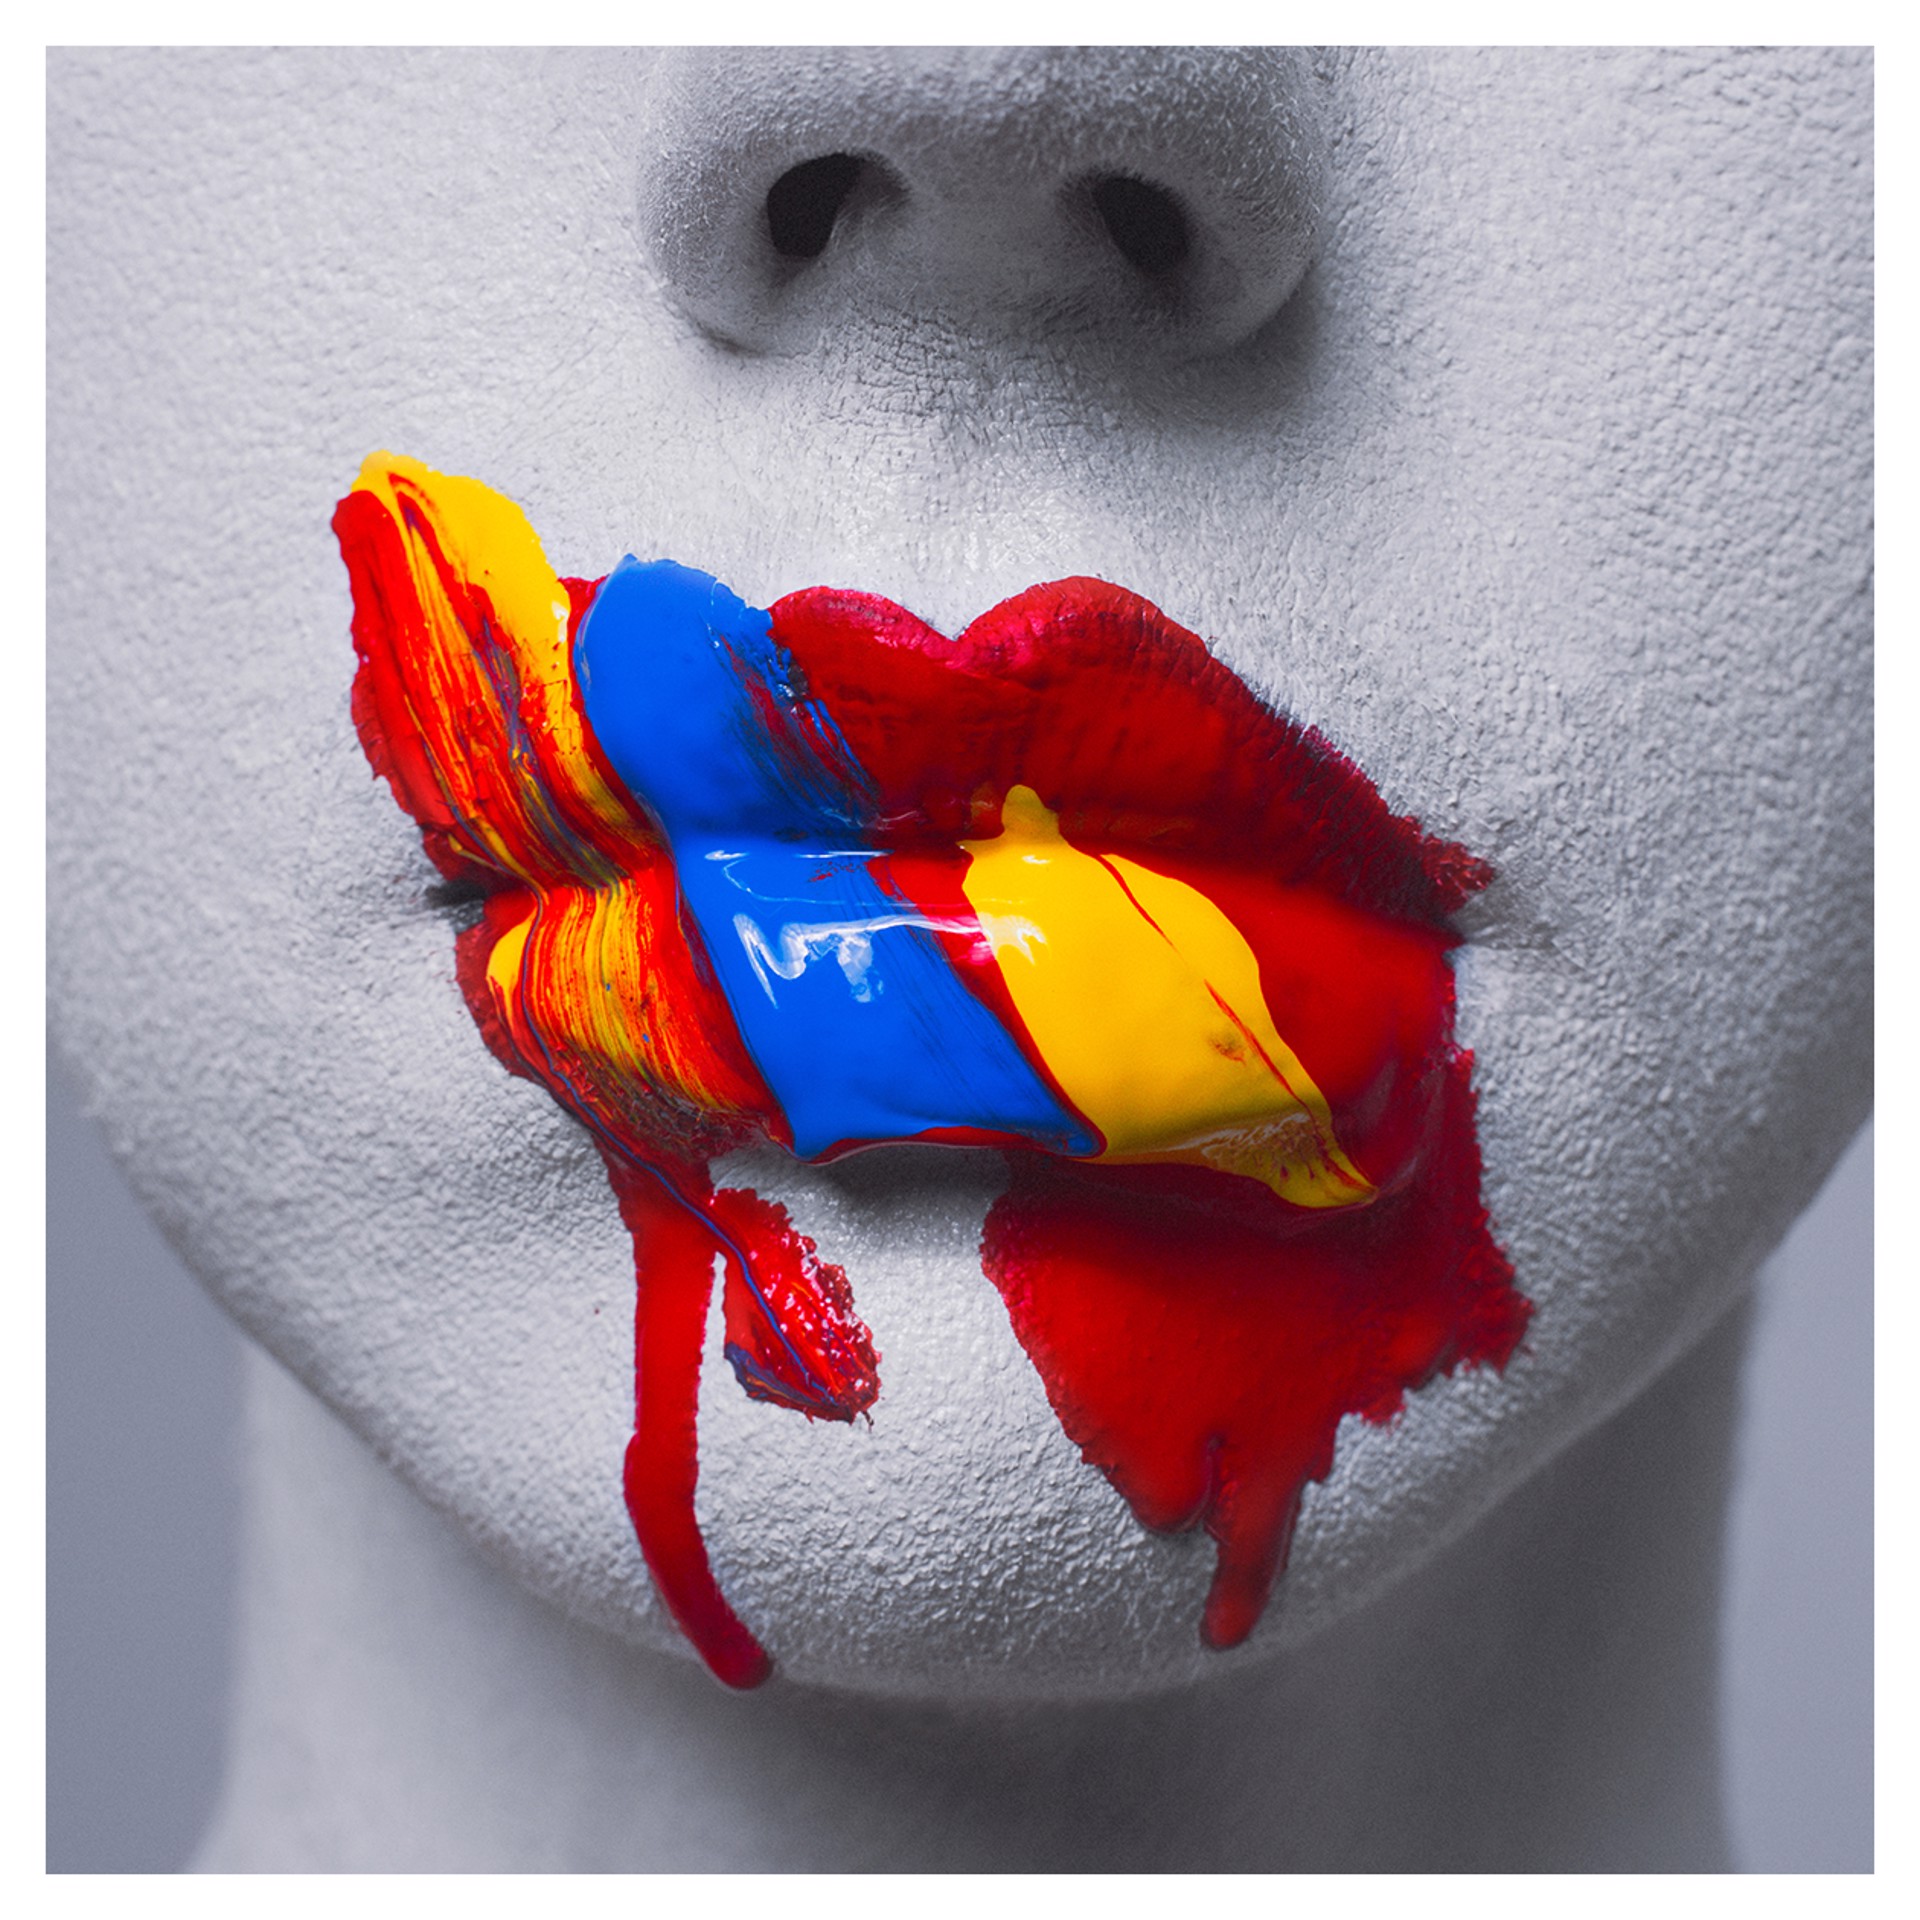 Primary Lips by Tyler Shields